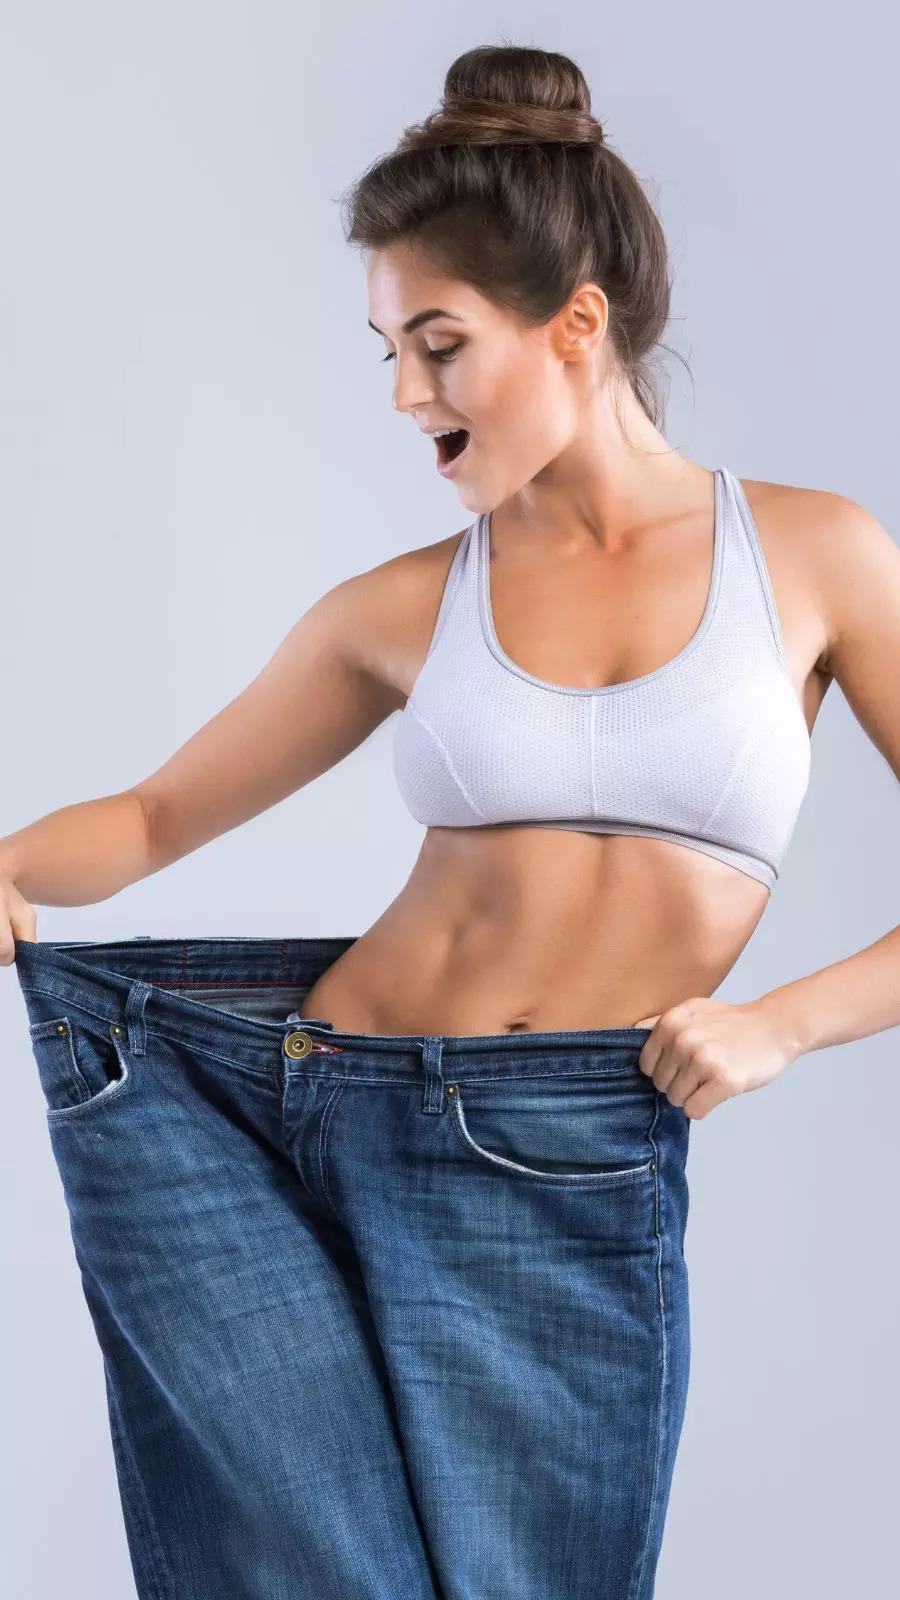 how to lose weight fast: Proven ways to lose weight without exercise